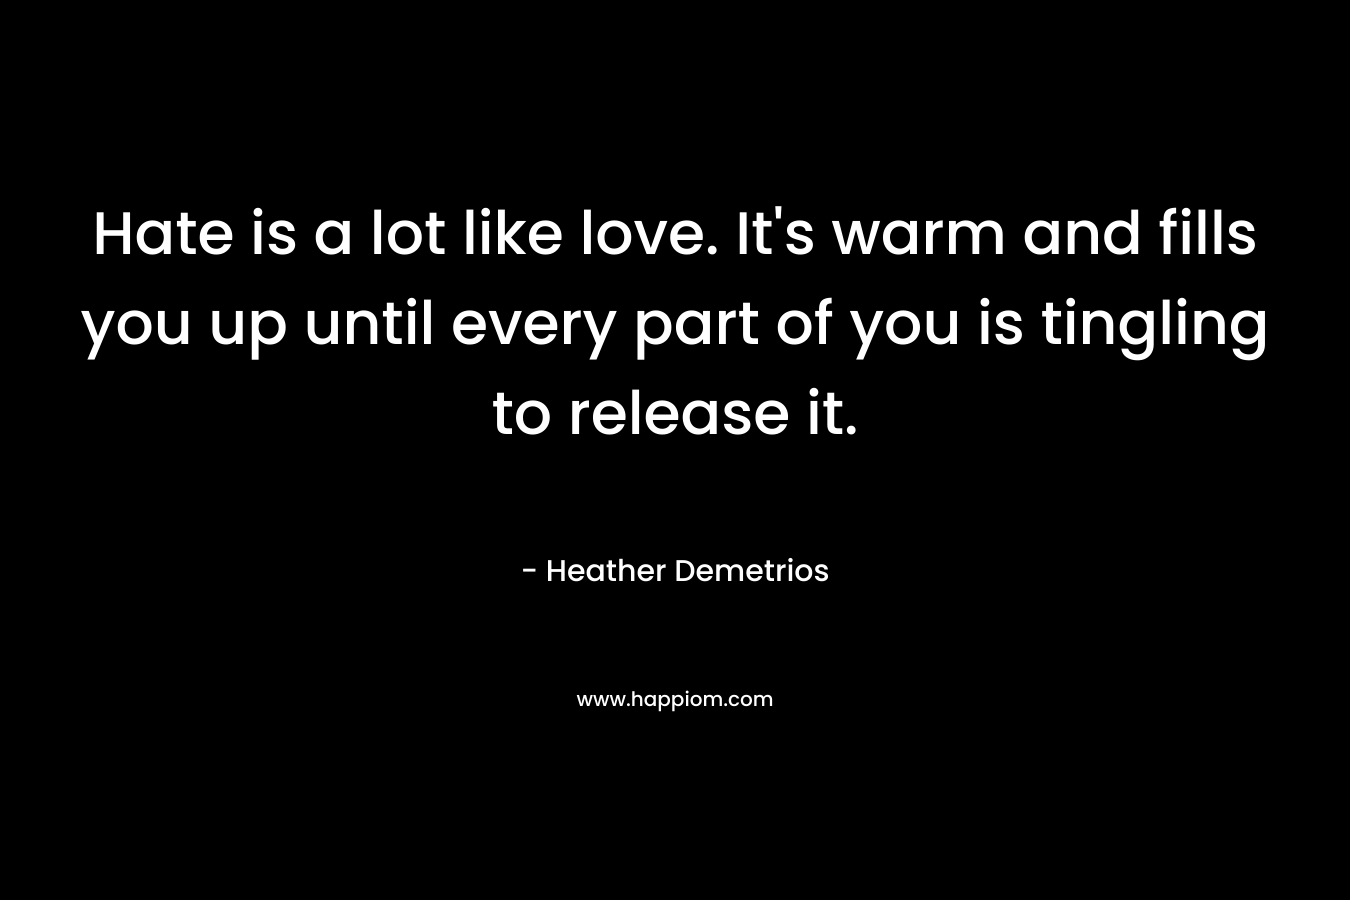 Hate is a lot like love. It’s warm and fills you up until every part of you is tingling to release it. – Heather Demetrios